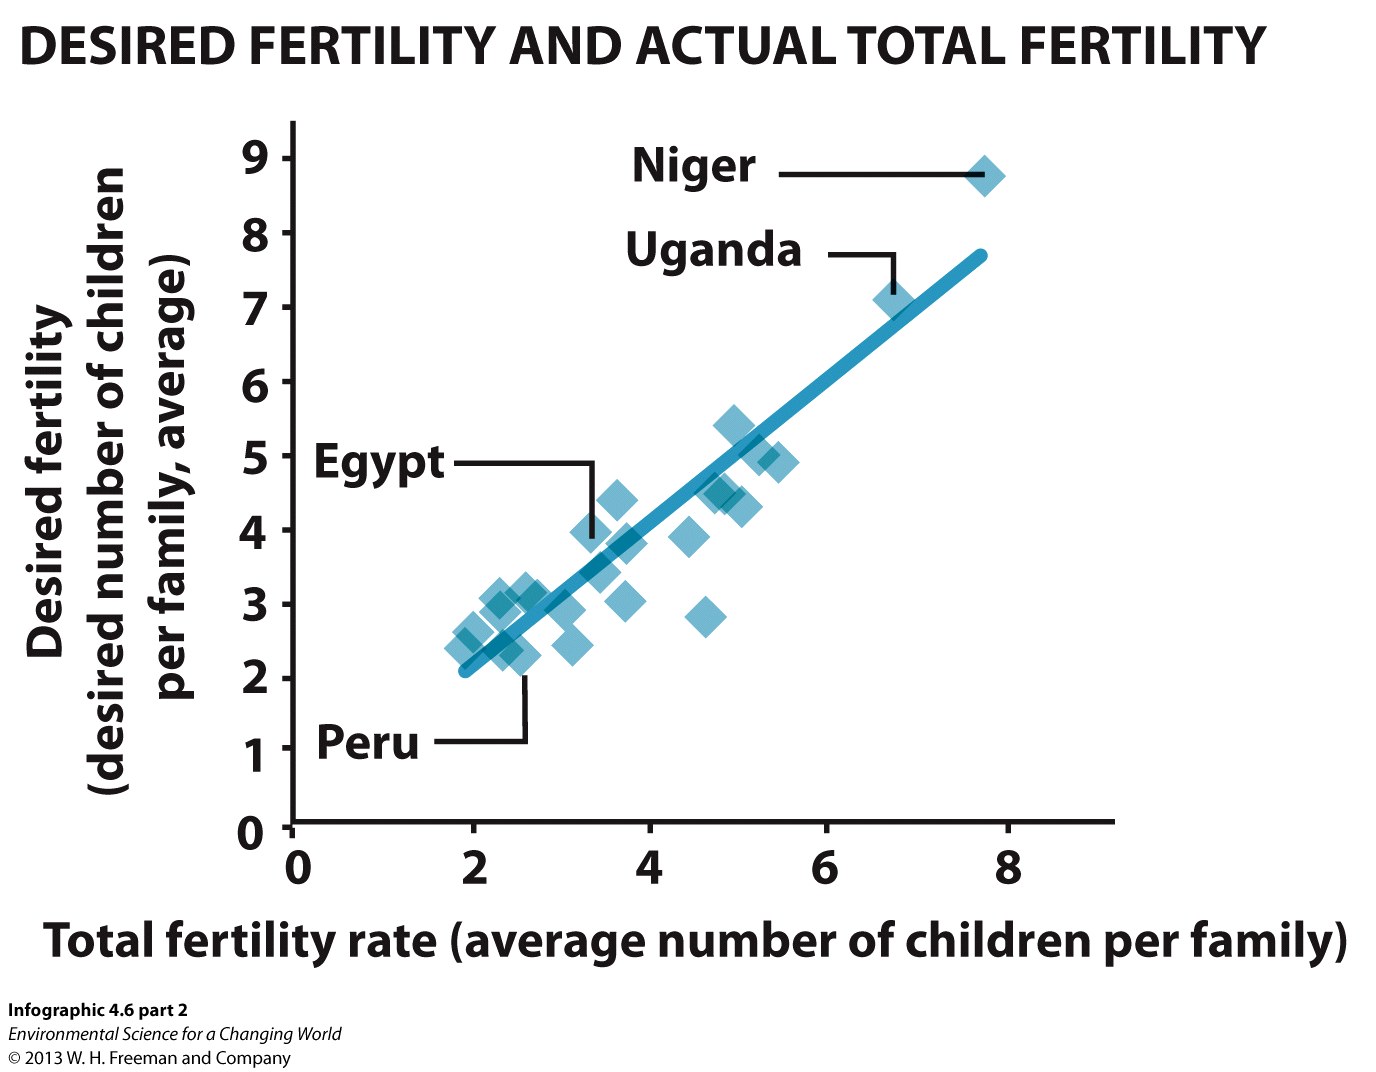 Infographic 4.4: Desired Fertility and Actual Total Fertility